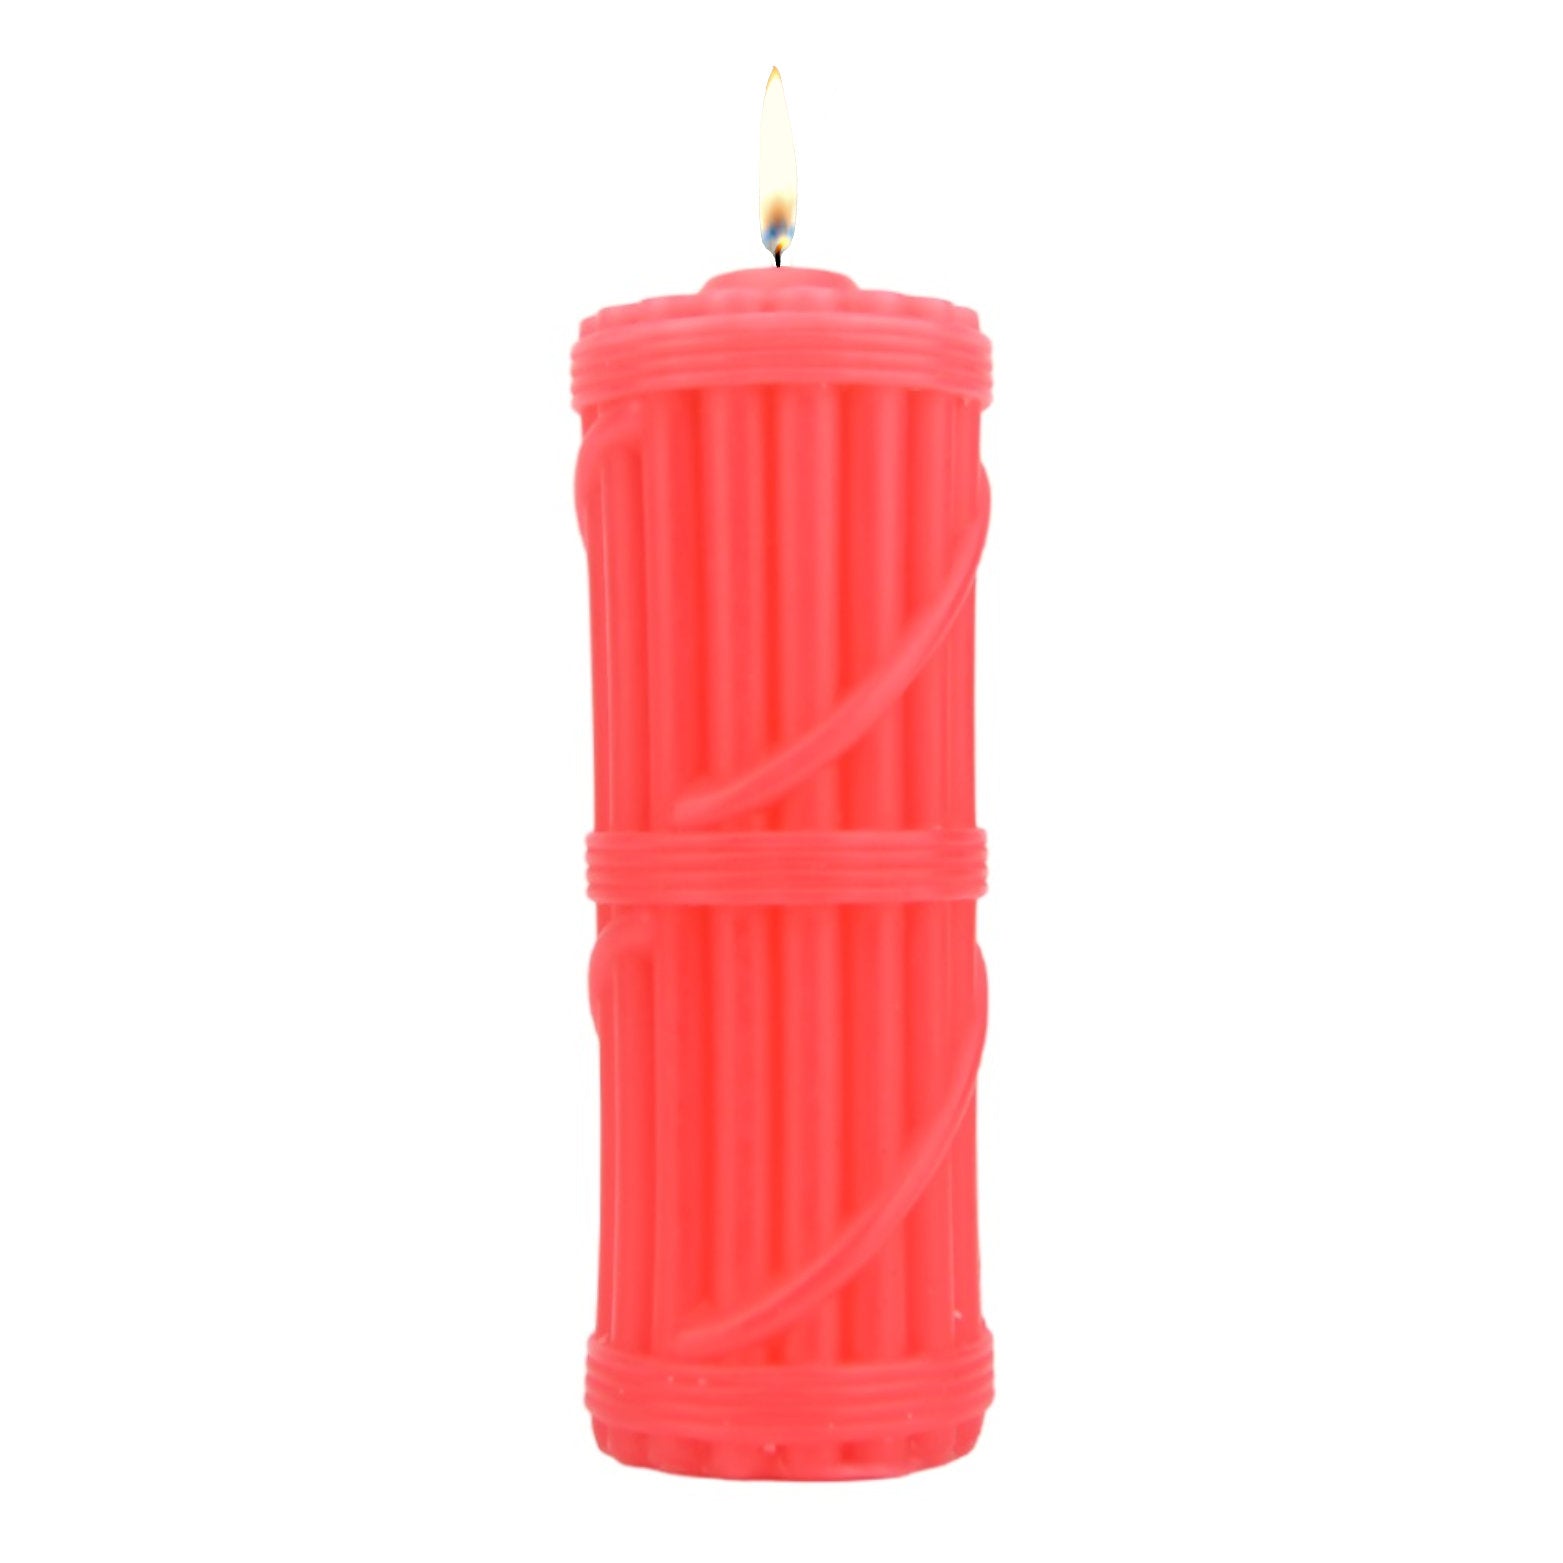 Bound to Play. Hot Wax Candle Red - PL4YHOUSE - PL4YHOUSE - Bound to Play. Hot Wax Candle Red - Bound to Play - Massage Oils and Candles - Bound to Play. Hot Wax Candle Red - {{ sex }} - {{ adult_toys }} - {{ UK }} - {{ christmas }} - {{ anal sex toys }} - {{ bondage }} - {{ dildos }} - {{ essentials }} - {{ male sex toys }} - {{ lingerie }} - {{ vibrators }}